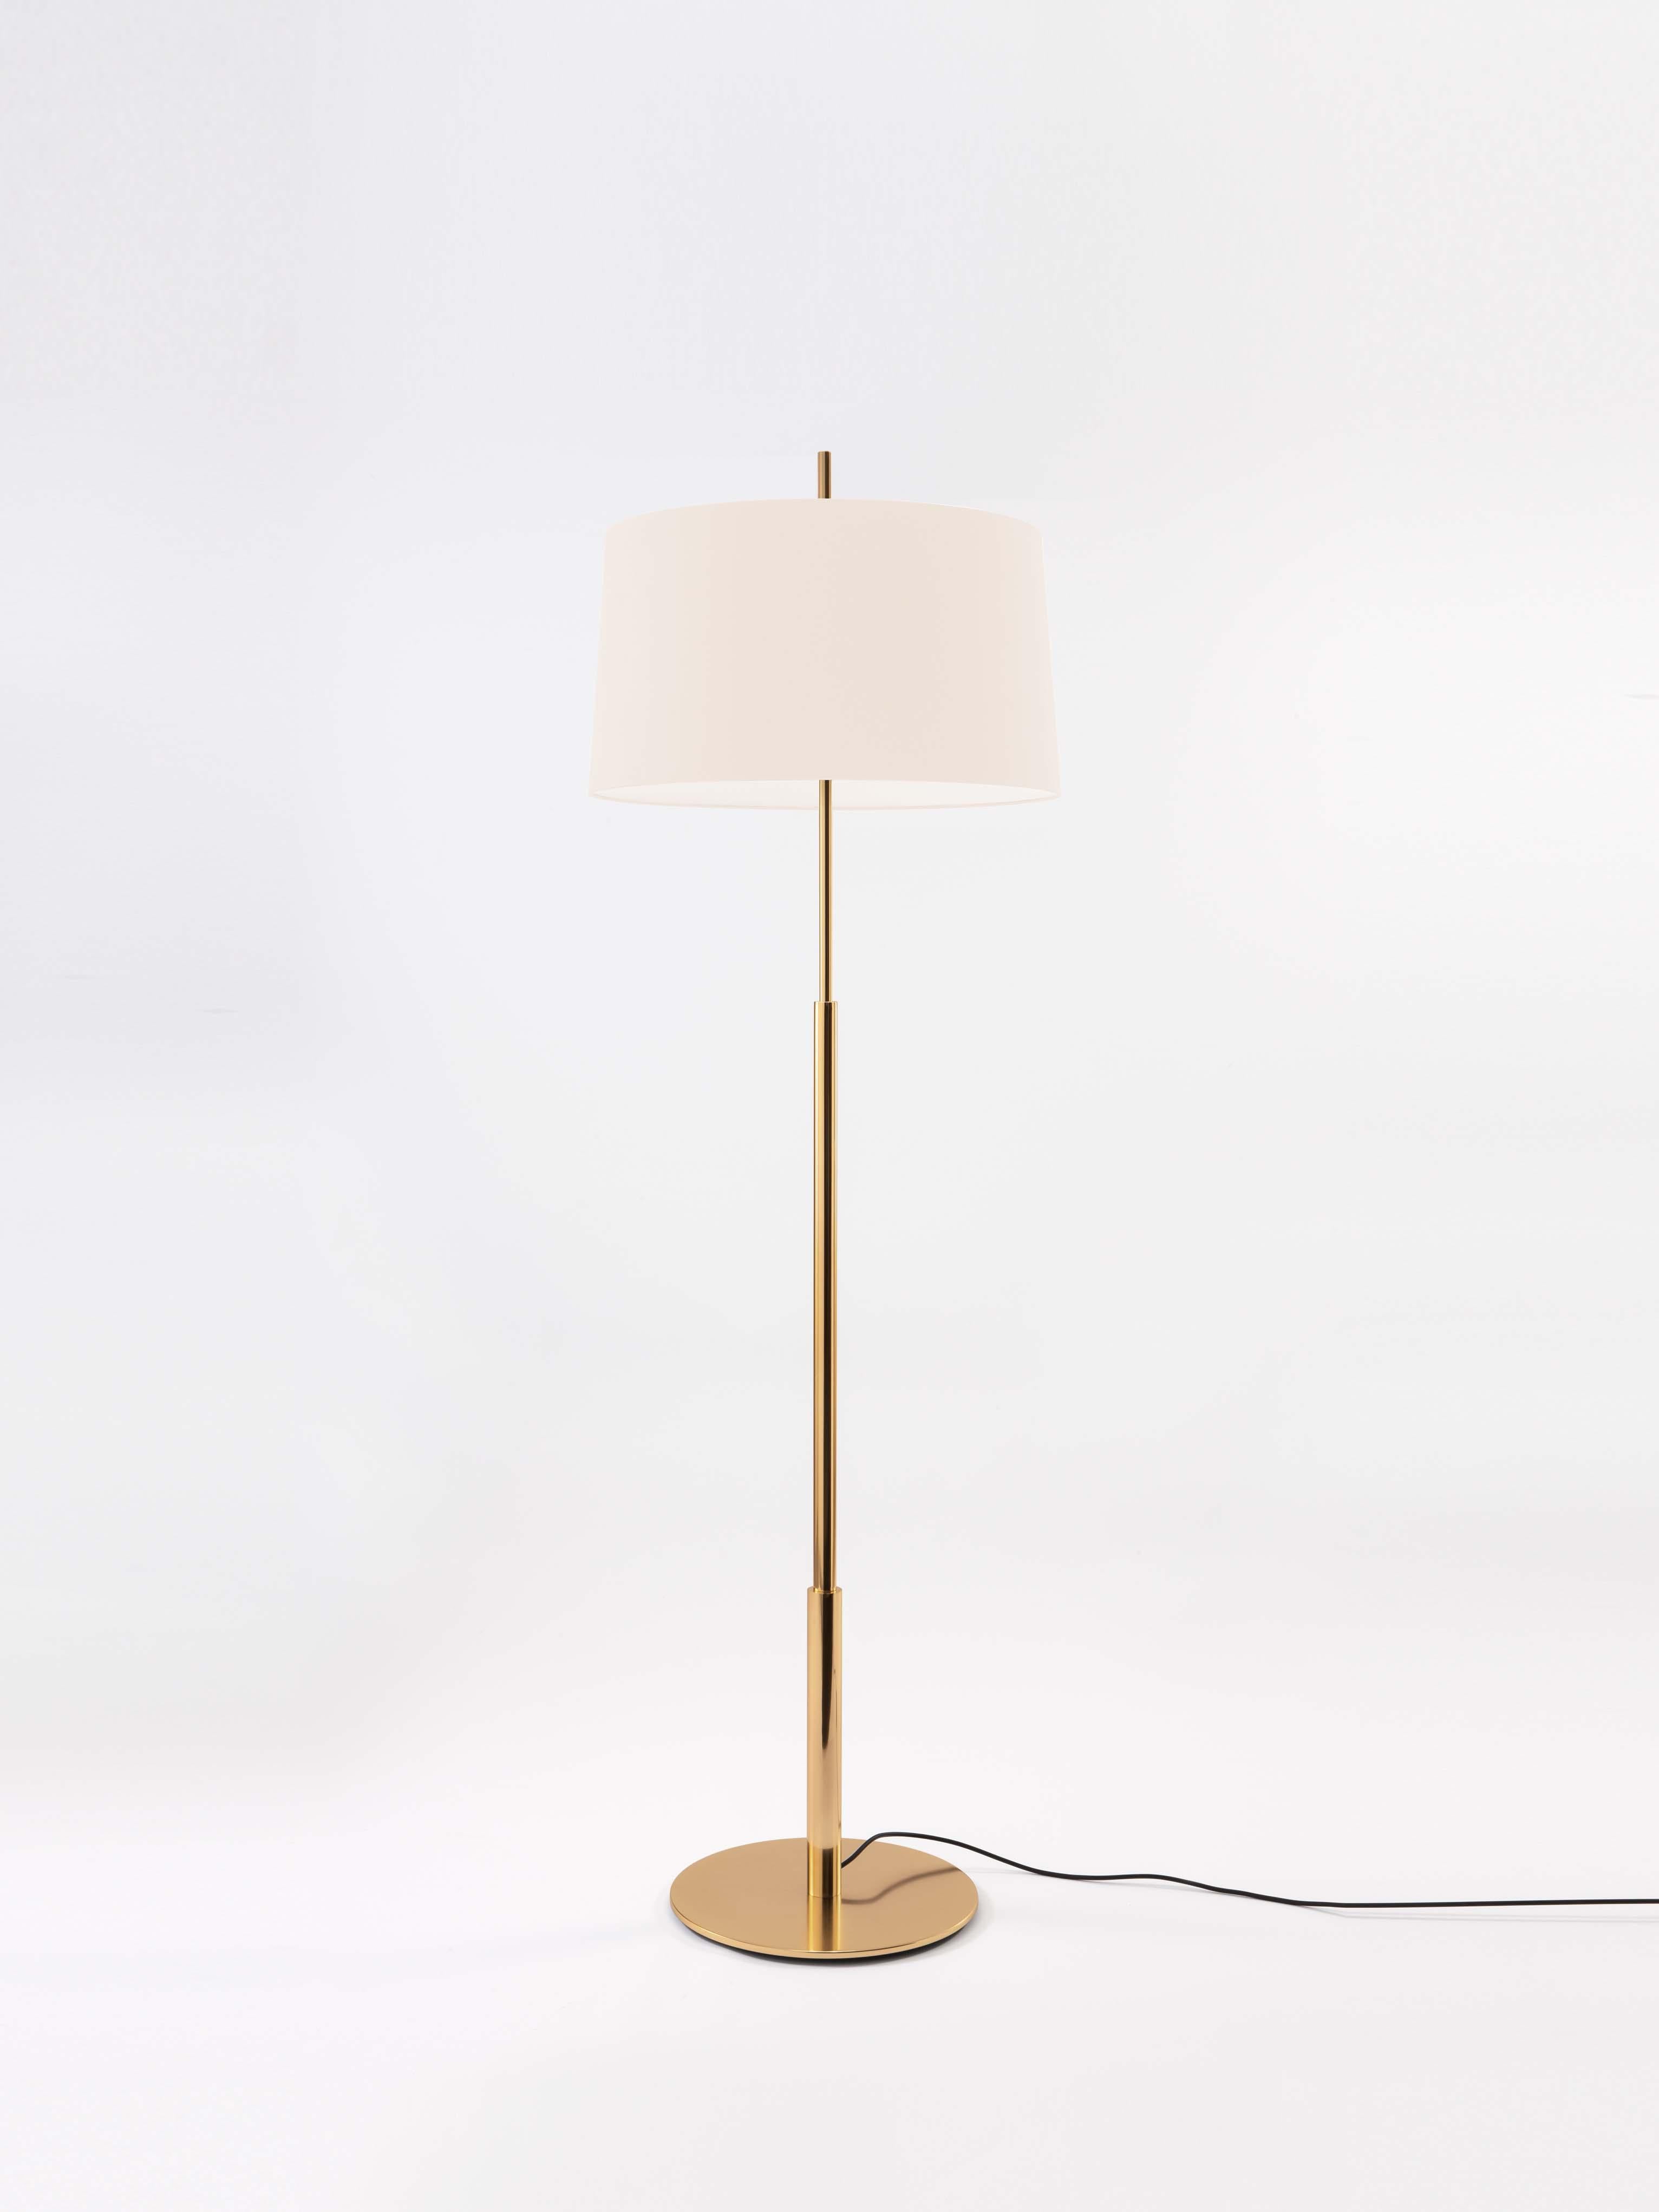 Gold Diana floor lamp by Federico Correa, Alfonso Milá, Miguel Milá
Dimensions: D 58 x H 183 cm
Materials: Metal, linen.
Available in nickel or gold and in black or white shade.

In keeping with the calling of its creators, the Diana lamp has a